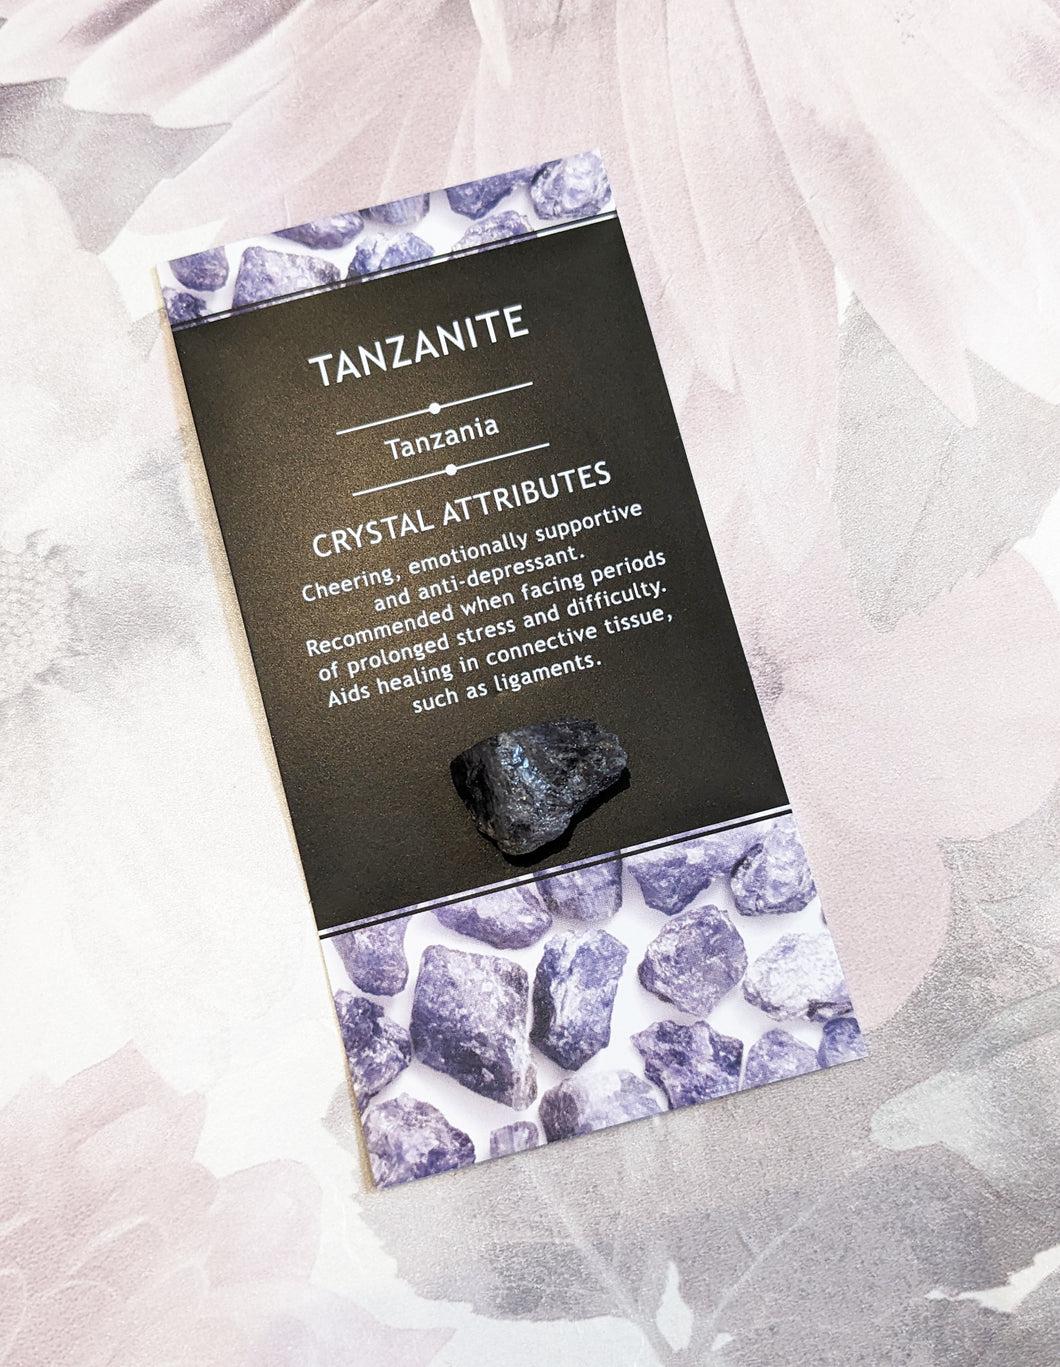 Raw Tanzanite Crystal - for Stress Management and Anti-Depression